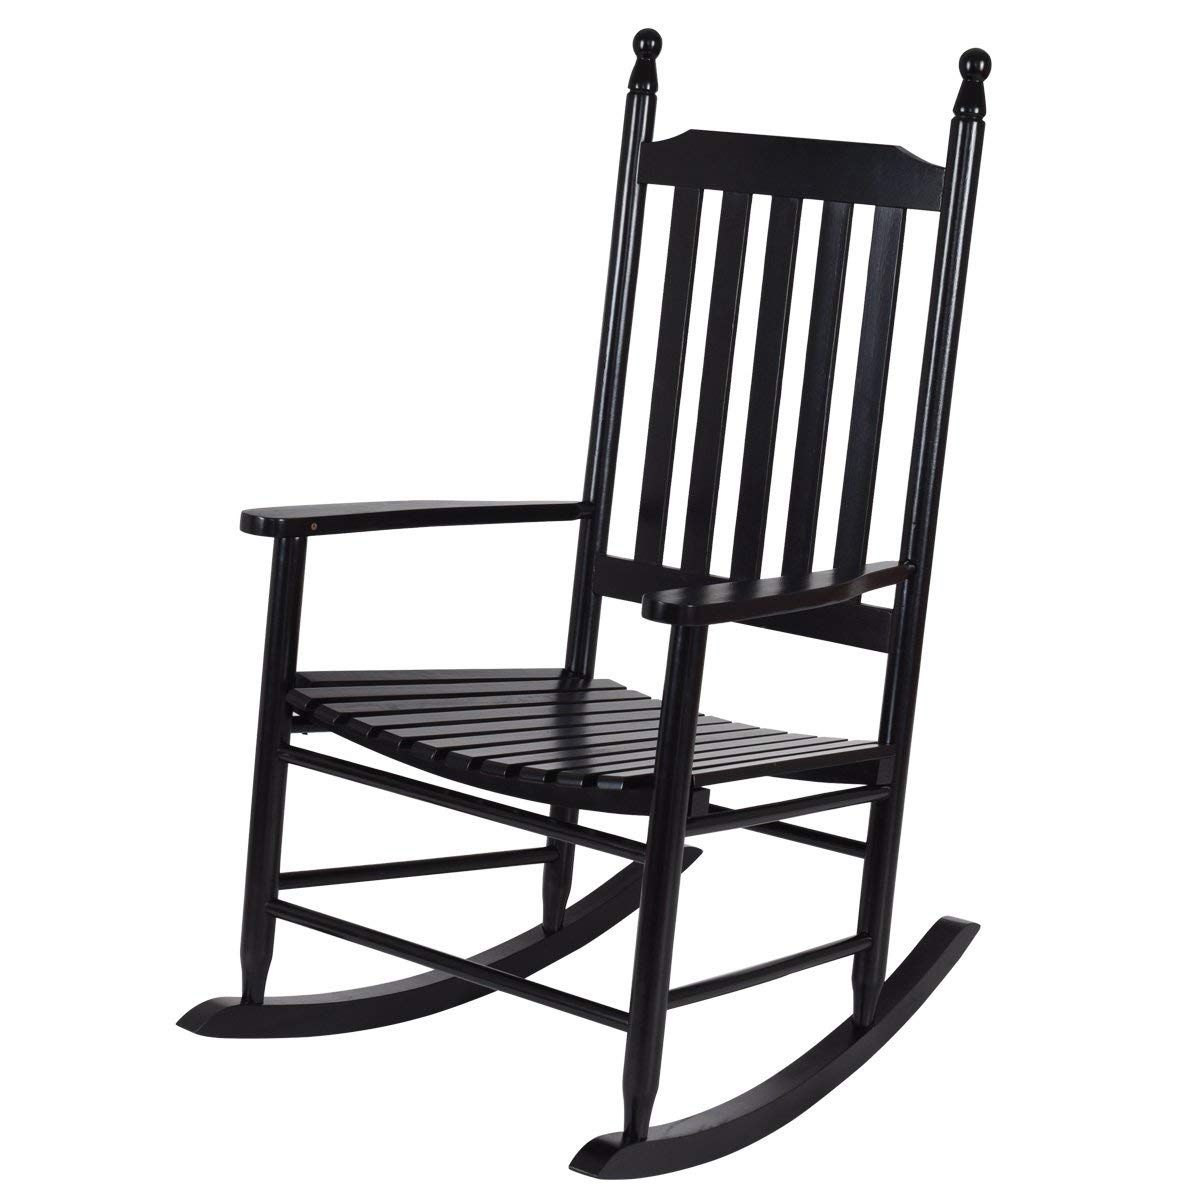 Amazon : Giantex Wood Outdoor Rocking Chair, Wooden Rocking In Fashionable Black Rocking Chairs (View 6 of 15)